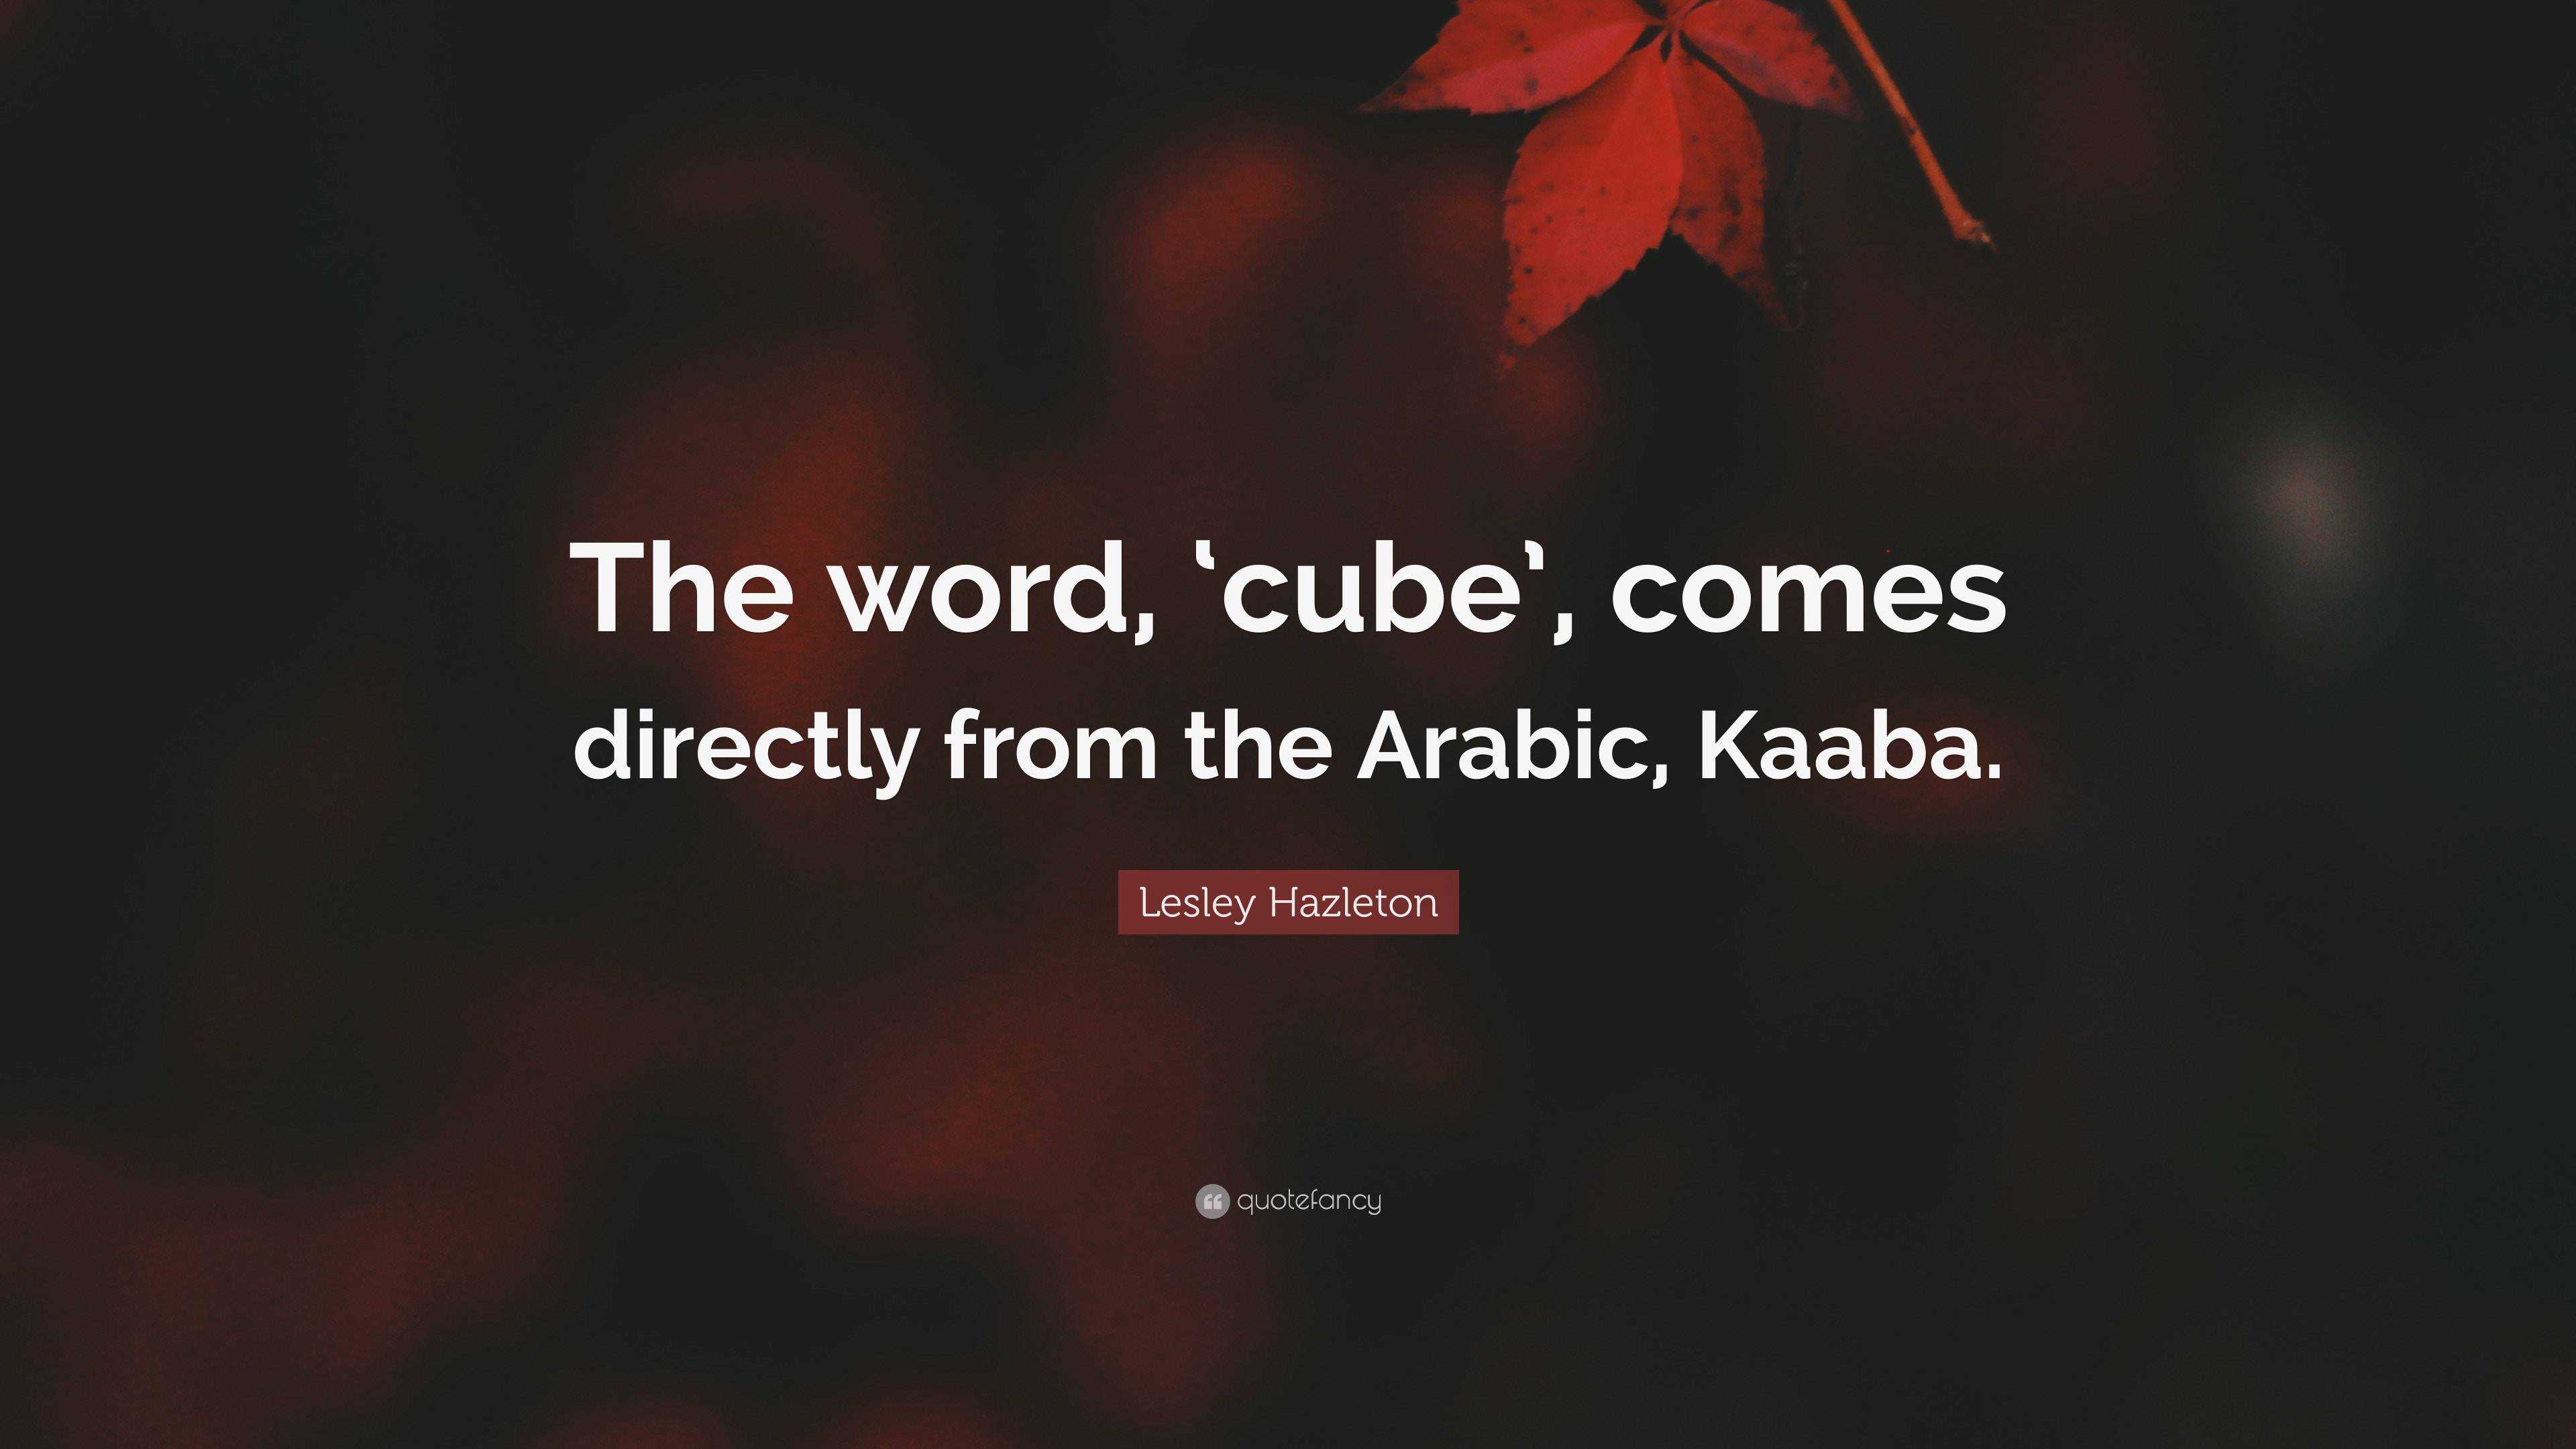 Lesley Hazleton Quote: “The word, 'cube', comes directly from the Arabic,  Kaaba.”